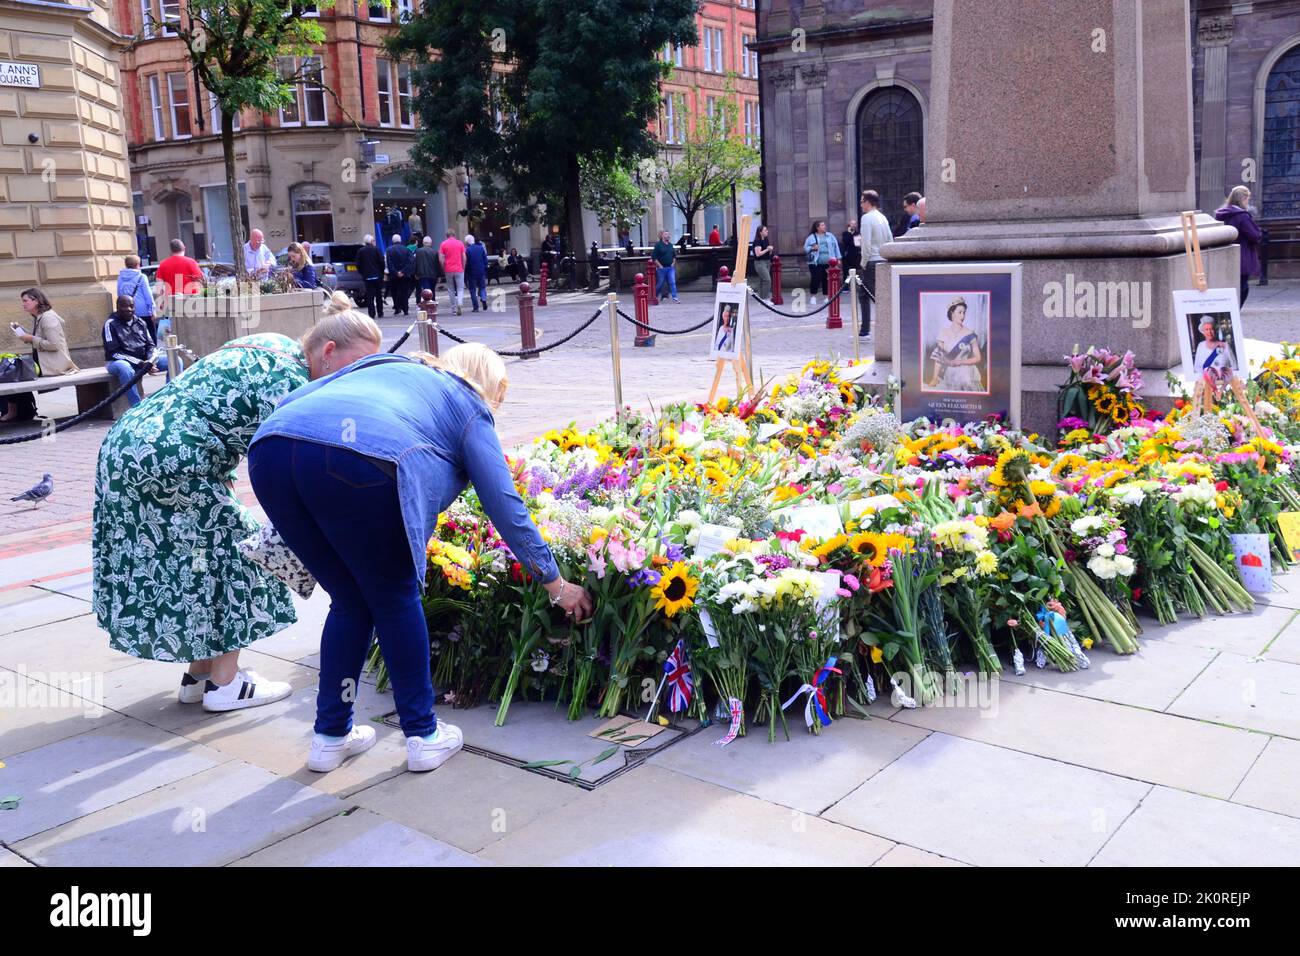 Manchester, UK, 13th September, 2022.  Women leave flowers in St Ann's Square, Manchester, United Kingdom, as a tribute to Her Majesty, Queen Elizabeth II. The Queen died, aged 96, on 8th September, 2022. Manchester City Council has said on its website that the city of Manchester will be observing the official 10-day mourning period and that: 'Residents may wish to lay flowers to mark Her Majesty’s death. You can lay flowers at St Ann's Square'. Credit: Terry Waller/Alamy Live News Stock Photo